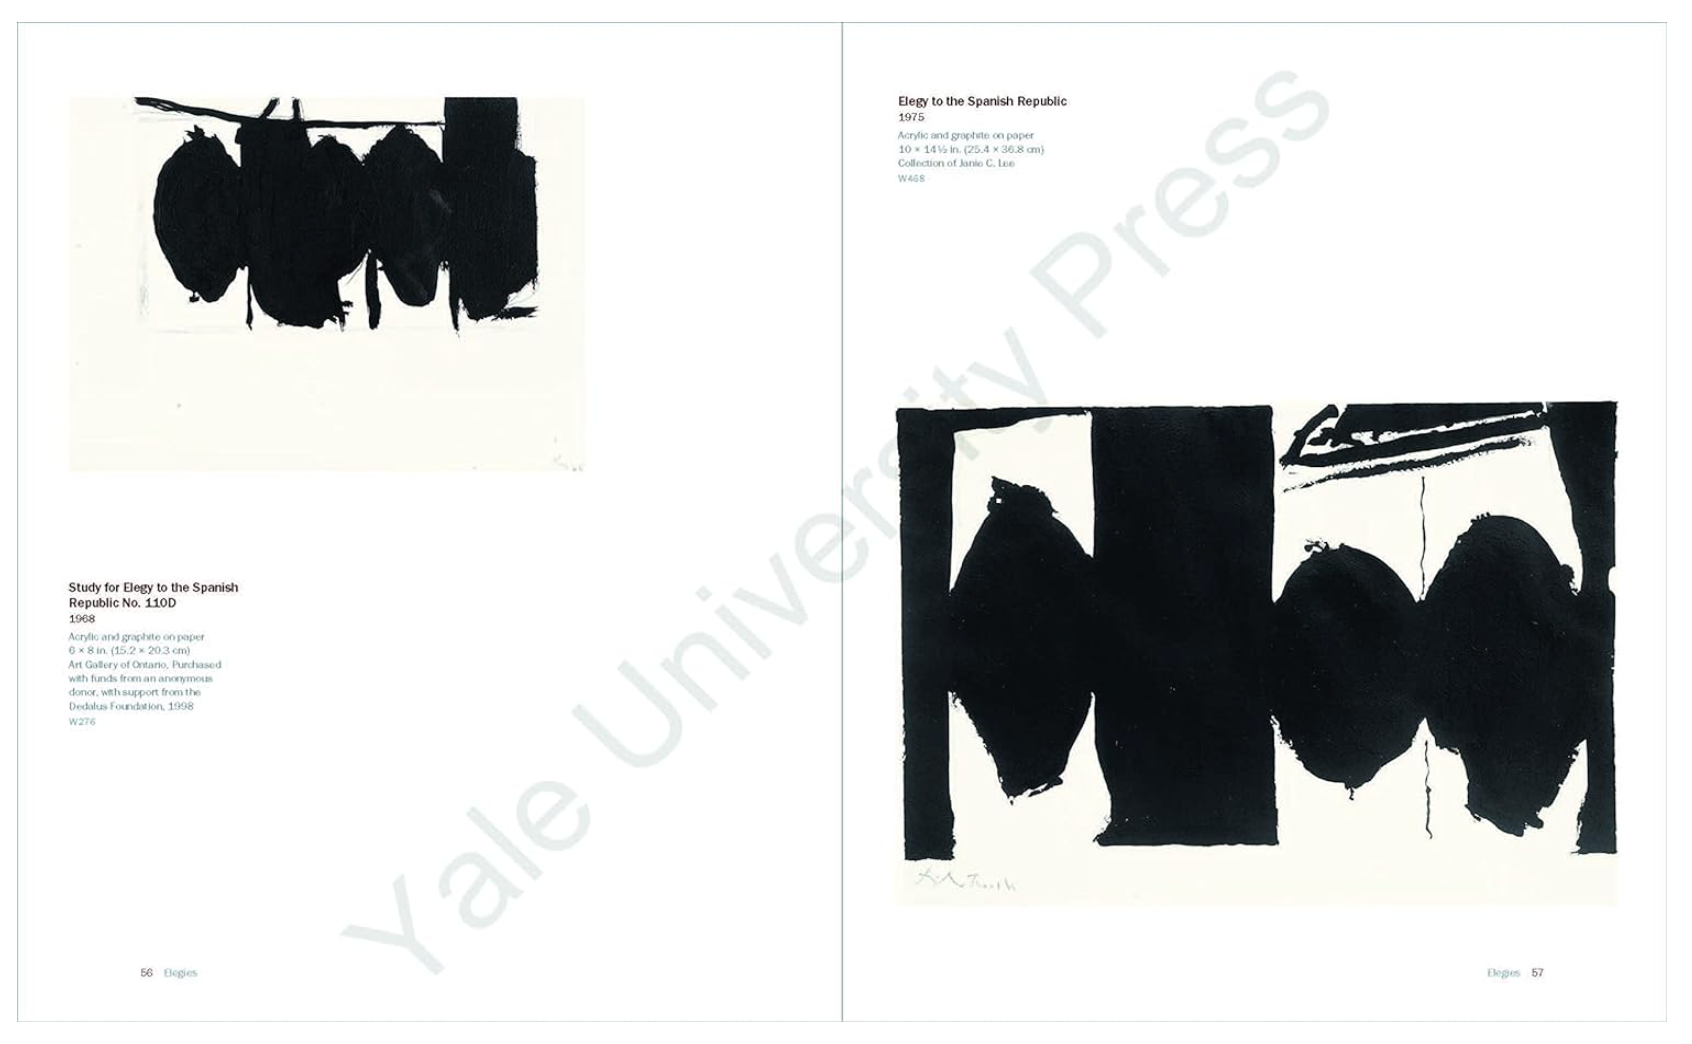 Robert Motherwell Drawing: As Fast as the Mind Itself. Pages 56 and 57 featuring Elegy to the Spanish Rupublic No. 110D